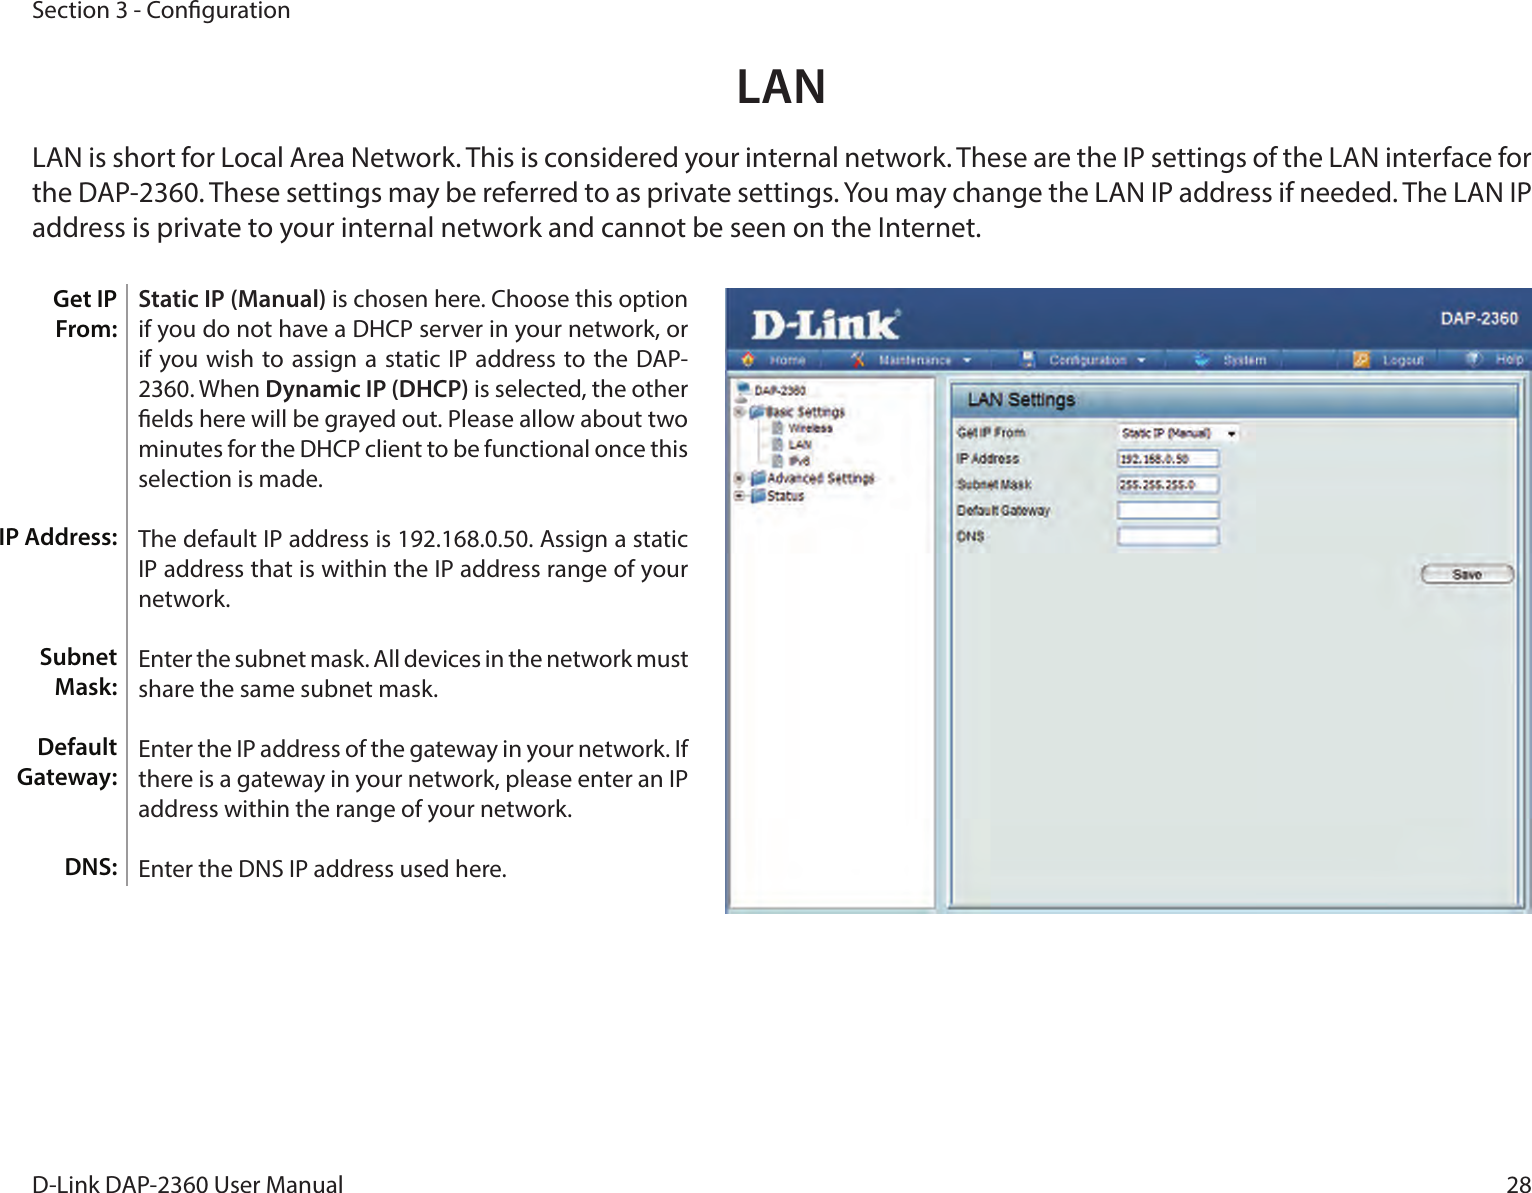 28D-Link DAP-2360 User ManualSection 3 - CongurationStatic IP (Manual) is chosen here. Choose this option if you do not have a DHCP server in your network, or if you wish to assign a  static IP address to the DAP-2360. When Dynamic IP (DHCP) is selected, the other elds here will be grayed out. Please allow about two minutes for the DHCP client to be functional once this selection is made. The default IP address is 192.168.0.50. Assign a static IP address that is within the IP address range of your network.Enter the subnet mask. All devices in the network must share the same subnet mask.Enter the IP address of the gateway in your network. If there is a gateway in your network, please enter an IP address within the range of your network.Enter the DNS IP address used here.LAN Get IP From:IP Address:Subnet Mask:Default Gateway: DNS:  LAN is short for Local Area Network. This is considered your internal network. These are the IP settings of the LAN interface for the DAP-2360. These settings may be referred to as private settings. You may change the LAN IP address if needed. The LAN IP address is private to your internal network and cannot be seen on the Internet.